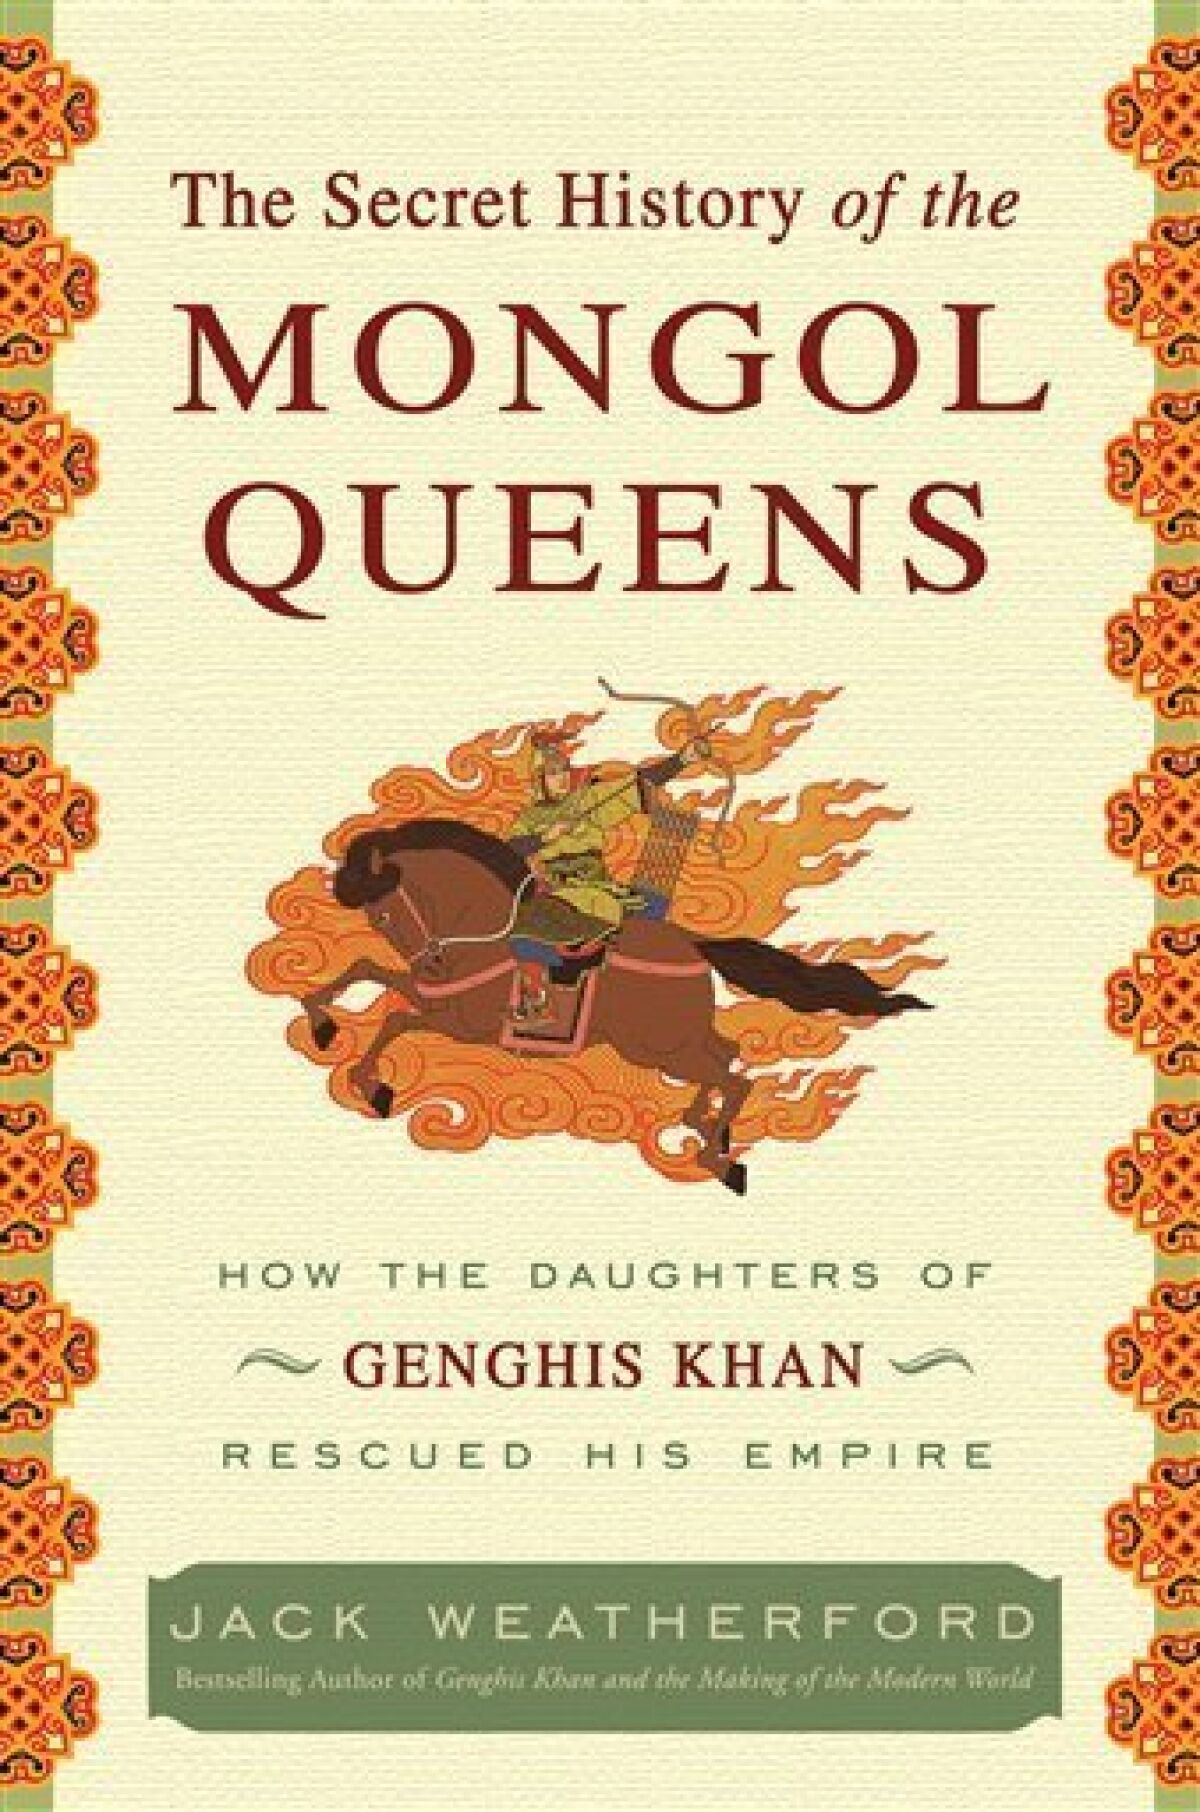 In this book cover image released by Crown Publishers, "The Secret History of the Mongol Queens: How the Daughters of Genghis Khan Rescued His Empire," by Jack Weatherford, is shown. (AP Photo/Crown Publishers)